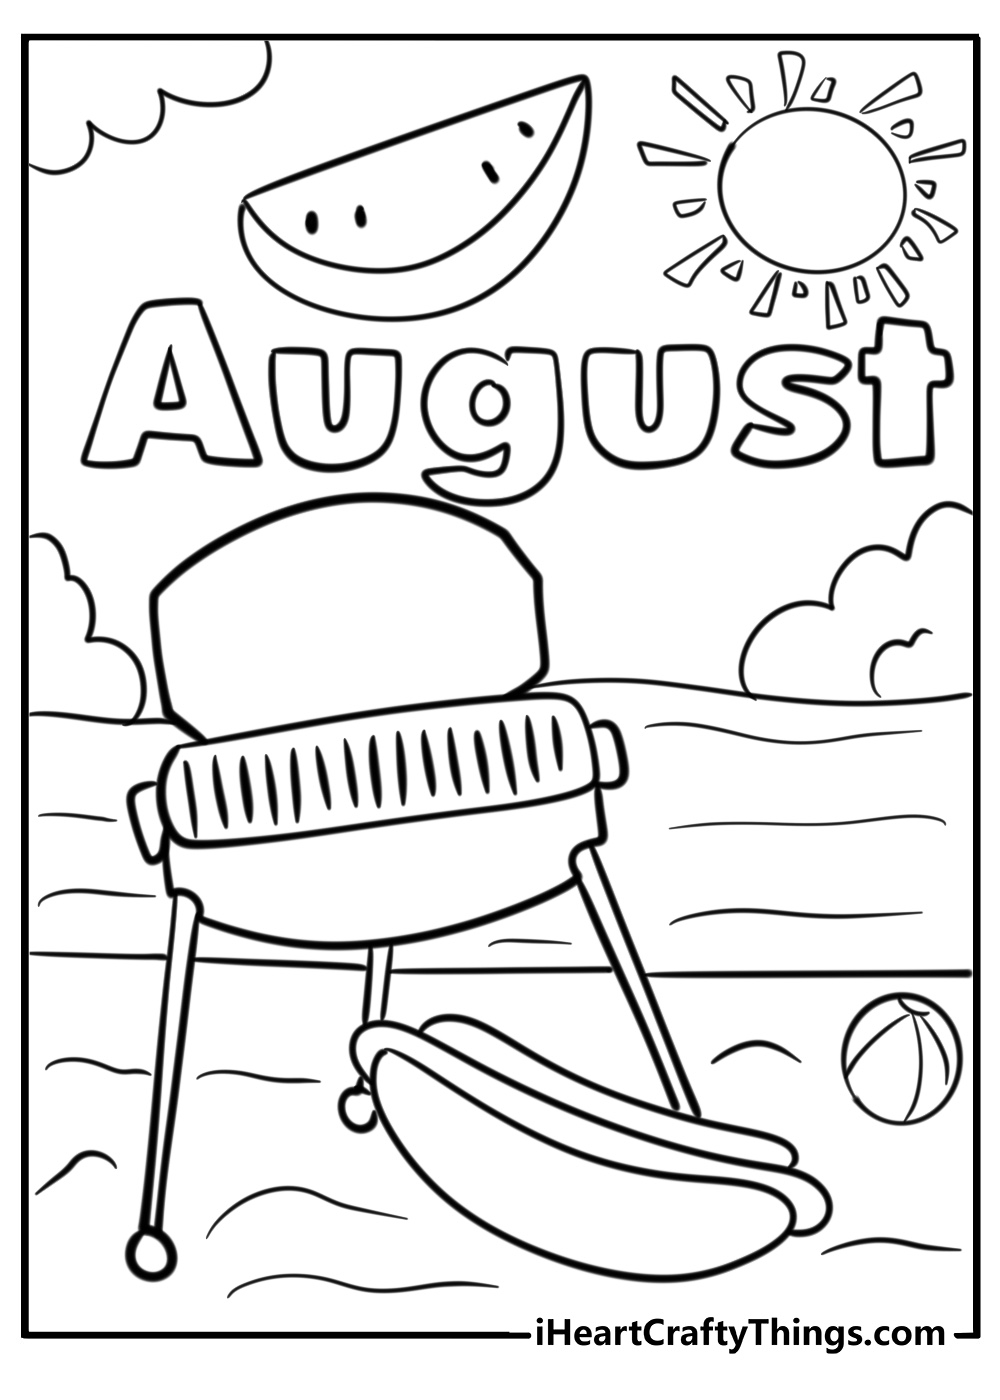 BBQ in the month of august